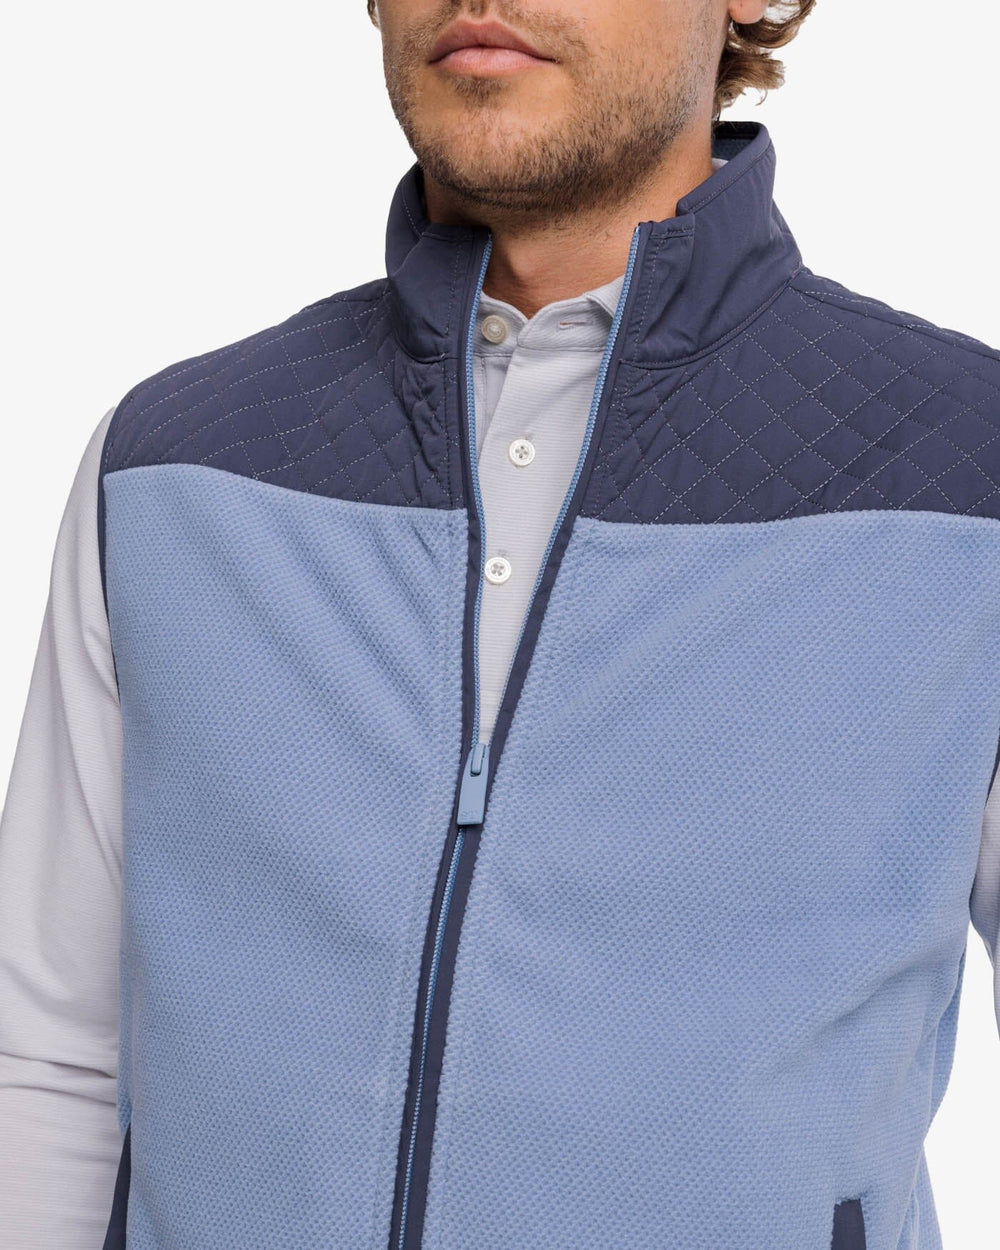 The detail view of the Southern Tide Hucksley Vest by Southern Tide - Mountain Spring Blue